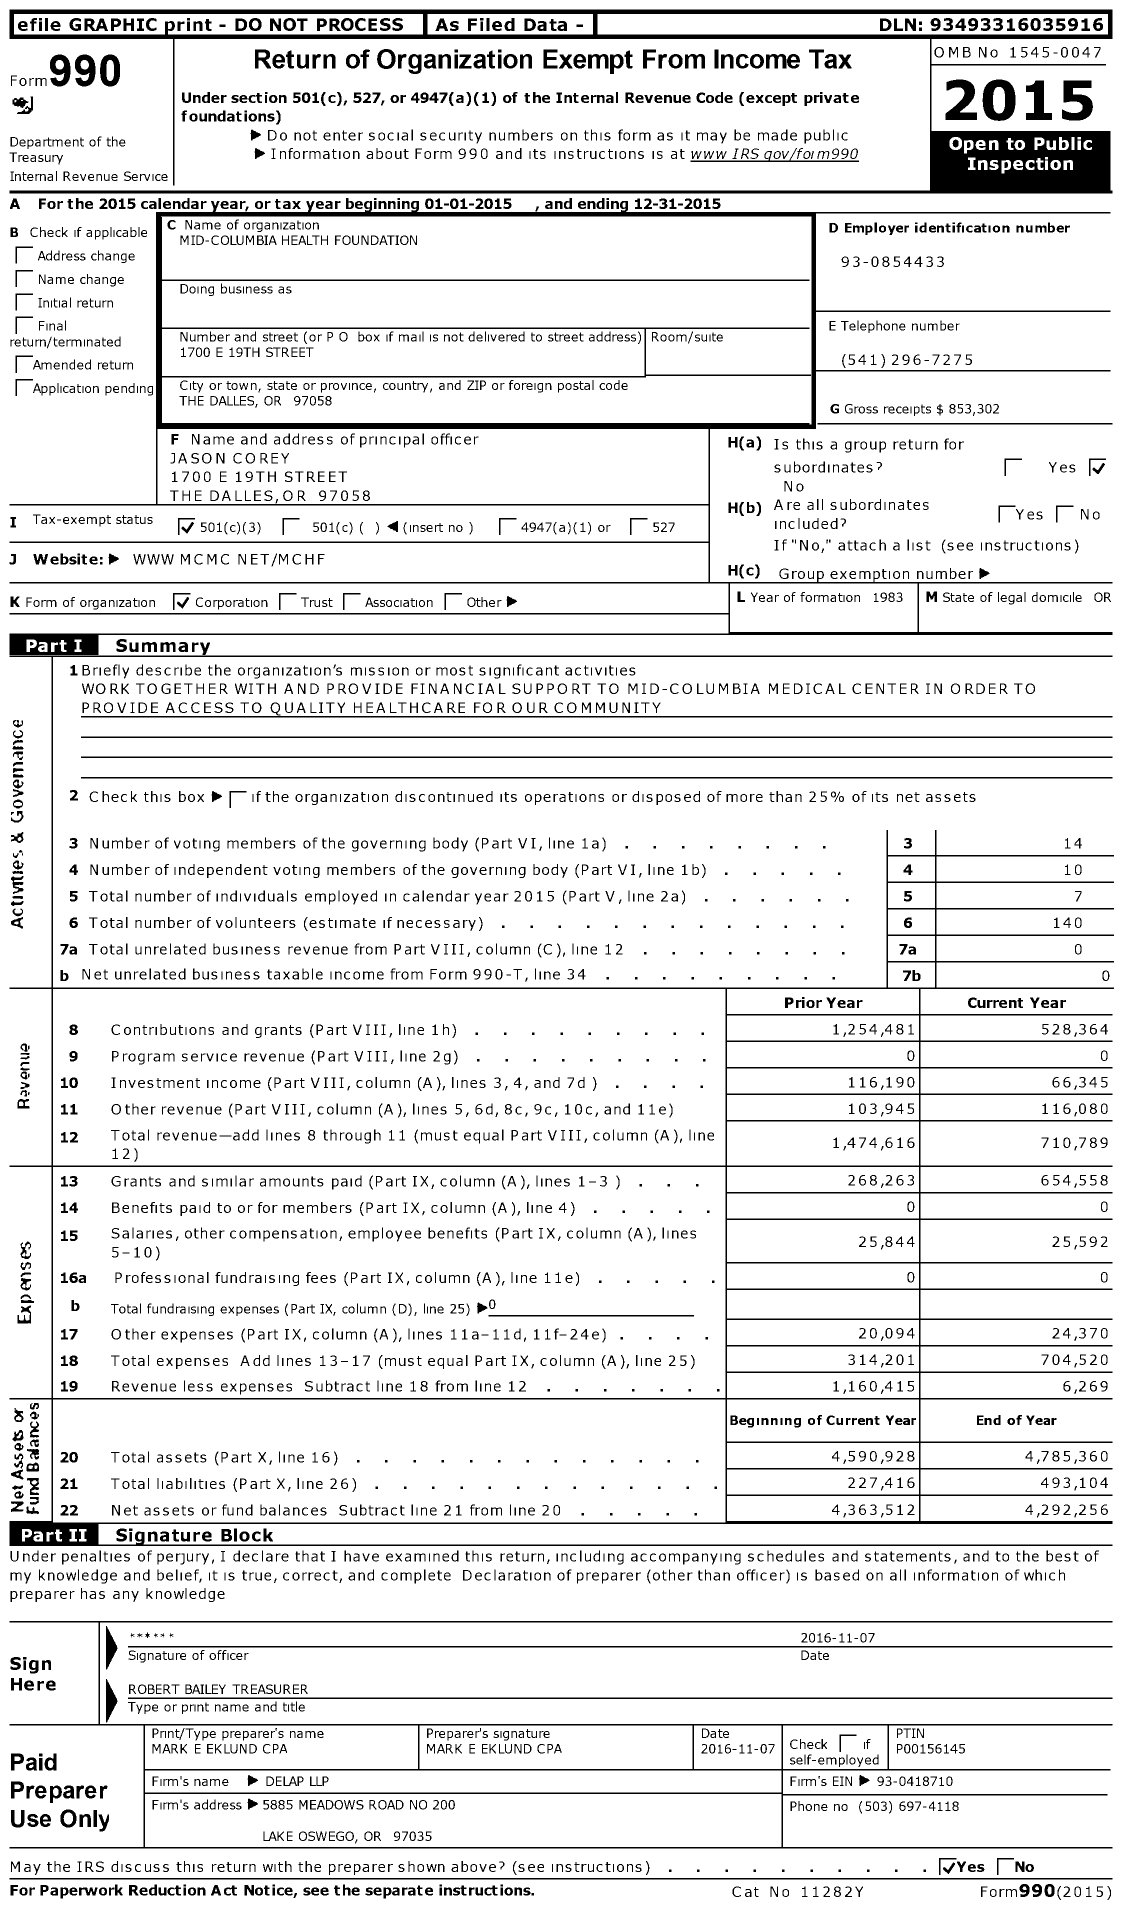 Image of first page of 2015 Form 990 for Mid-Columbia Health Foundation